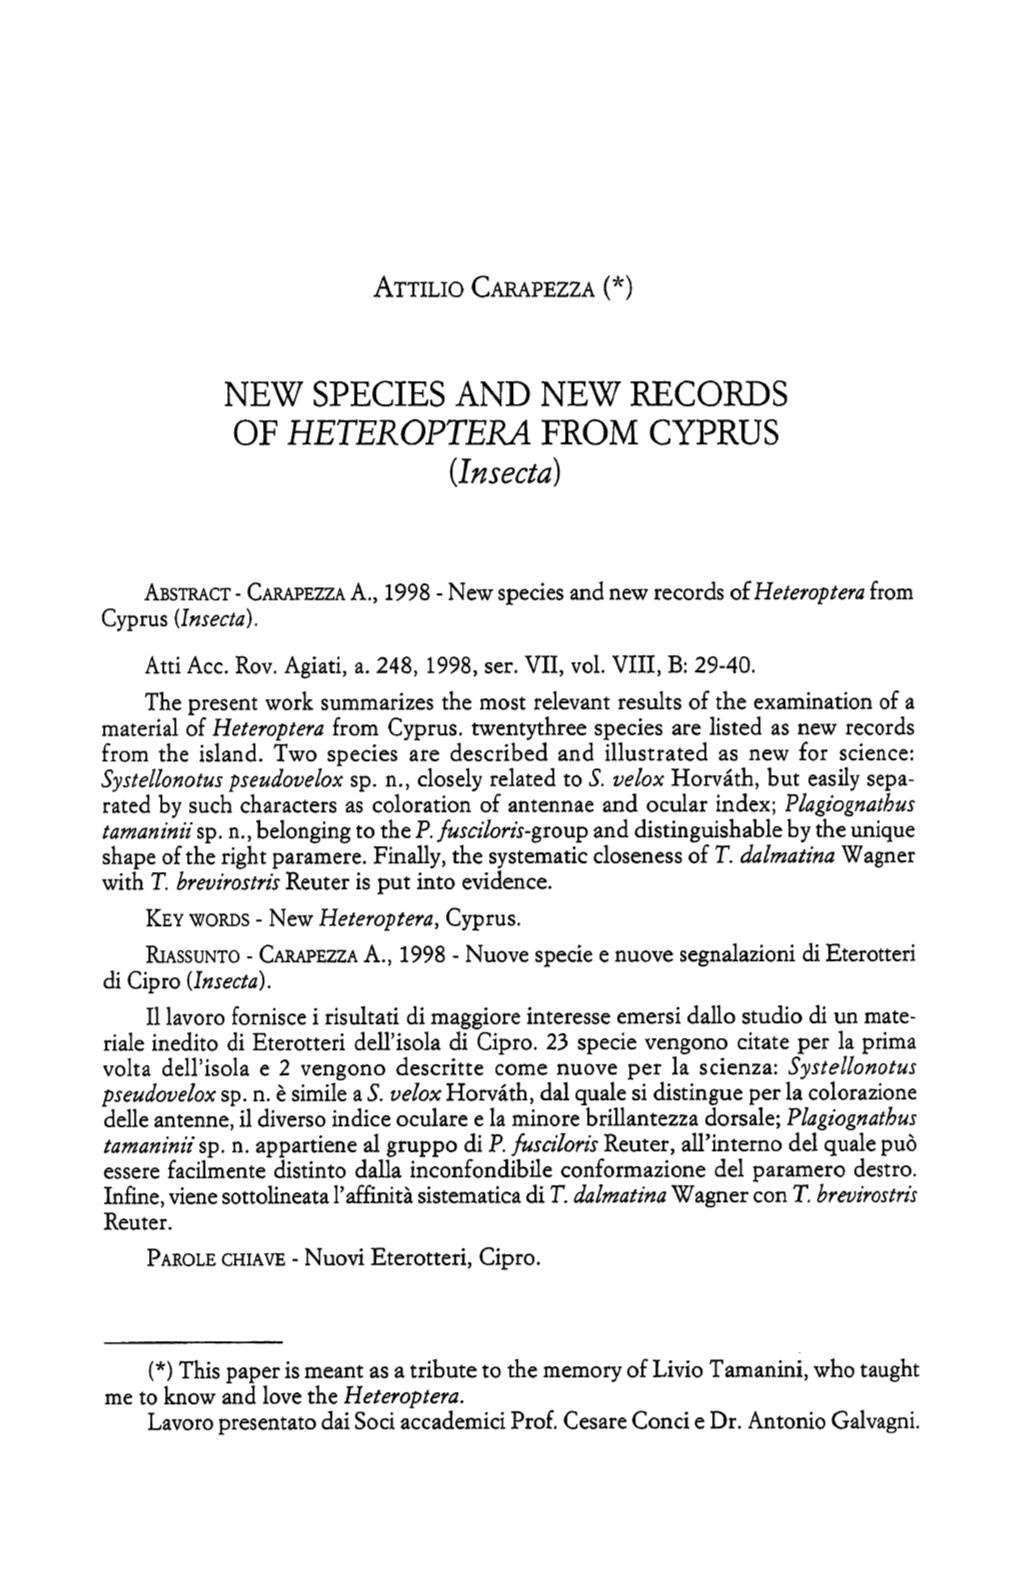 NEW SPECIES and NEW RECORDS of HETEROPTERA from CYPRUS (Insecta)